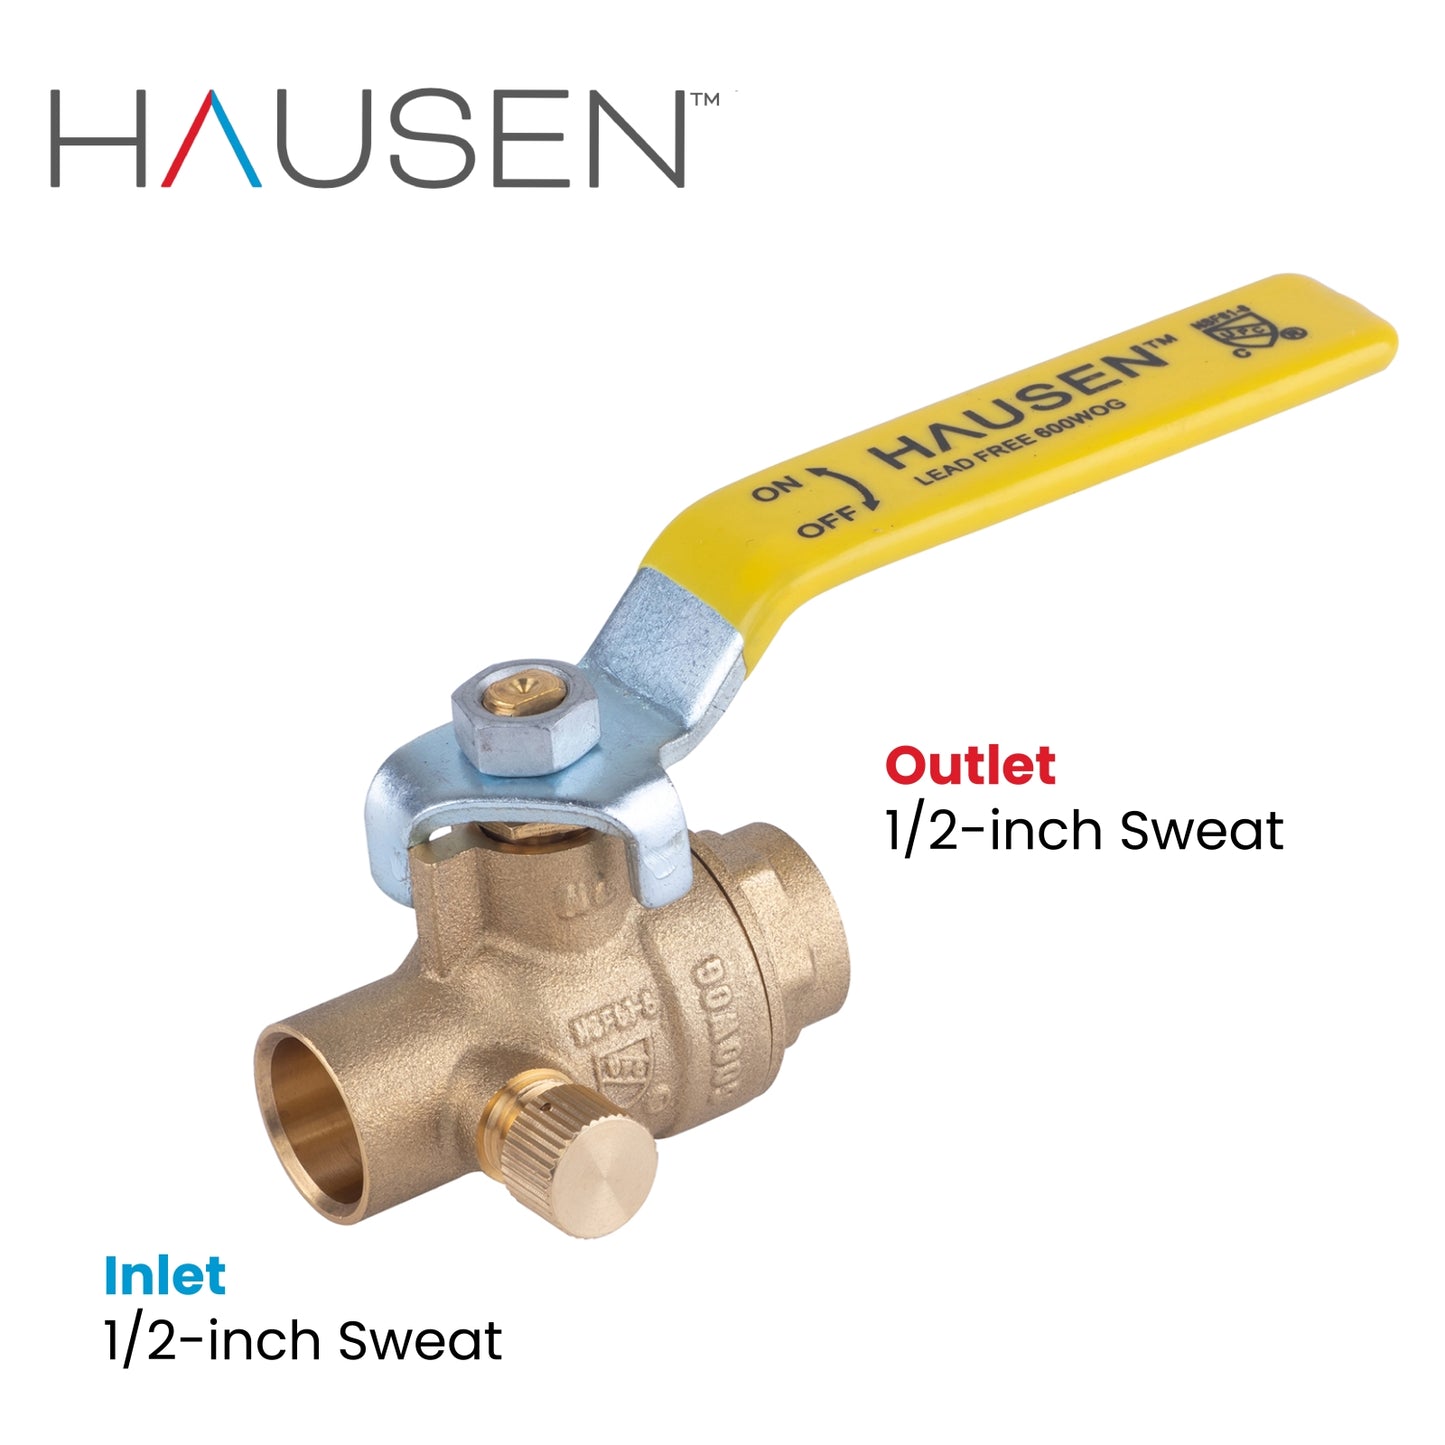 Hausen 1/2-inch Sweat x 1/2-inch Sweat Full Port Brass Ball Valve with Drain; Lead Free Forged Brass; Blowout Resistant Stem; For Use in Potable Water, Oil and Gas Distribution Systems, 10-Pack